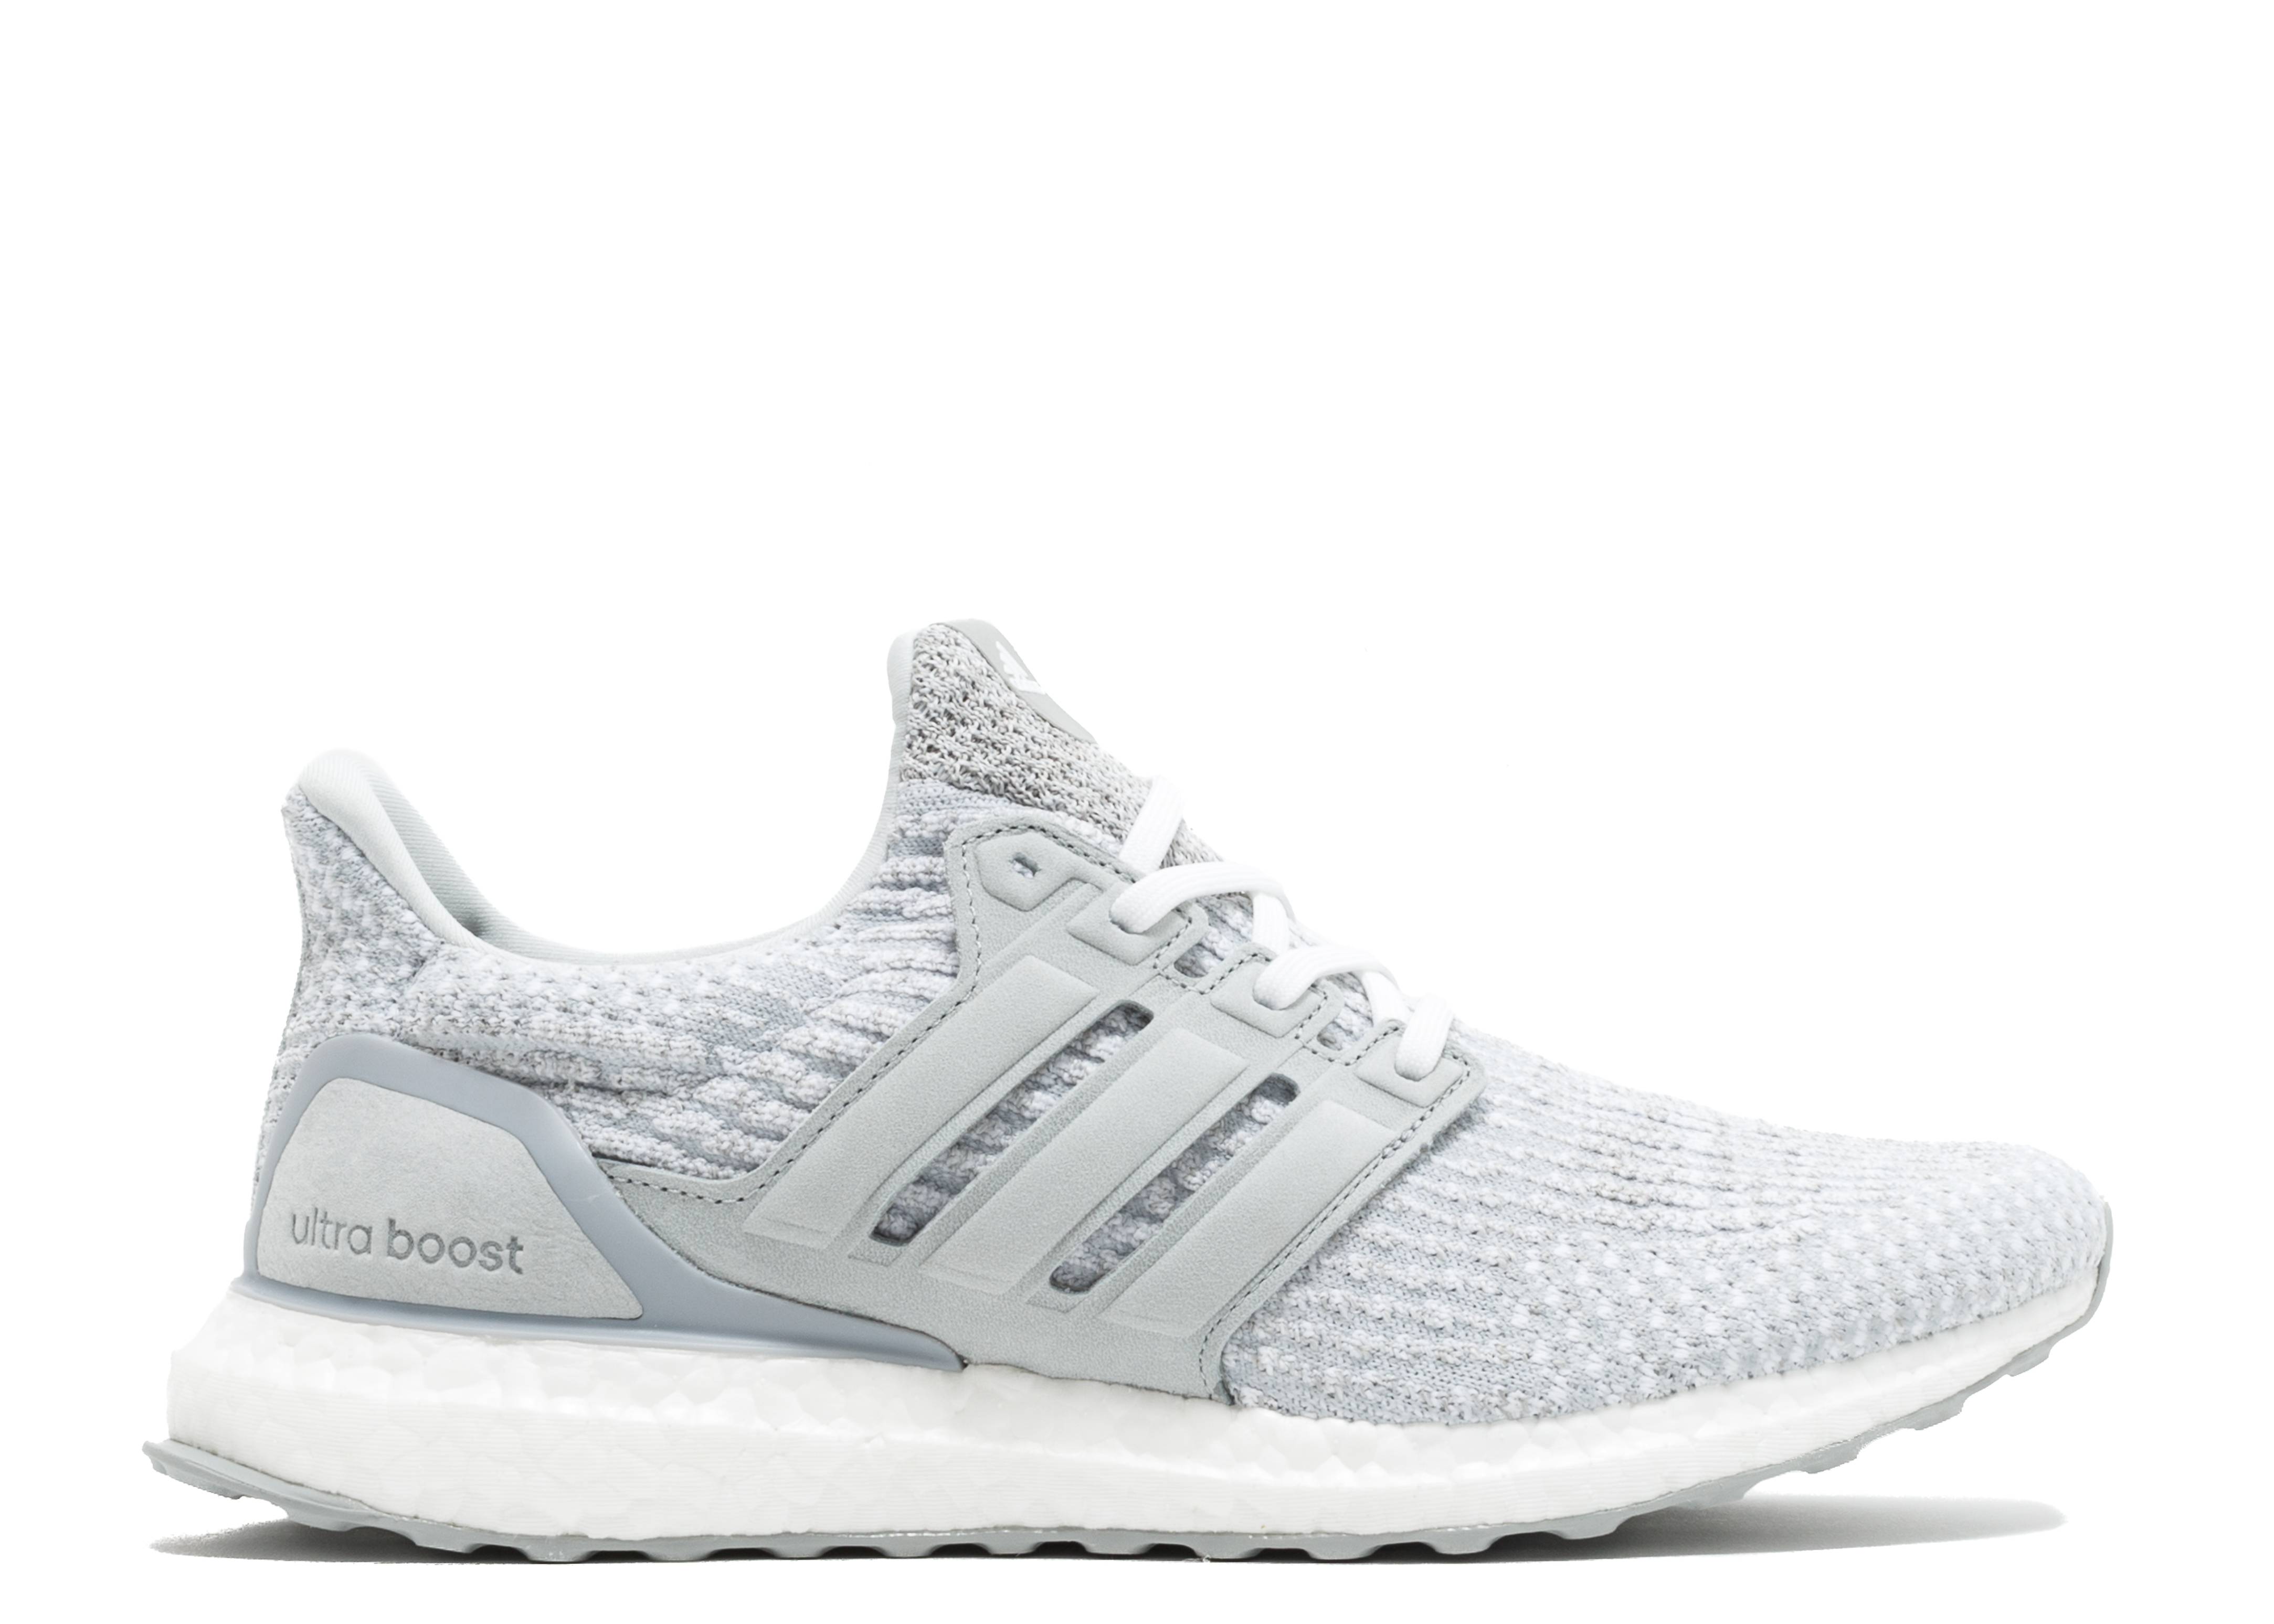 Reigning Champ x Wmns UltraBoost 3.0 'Clear Grey'